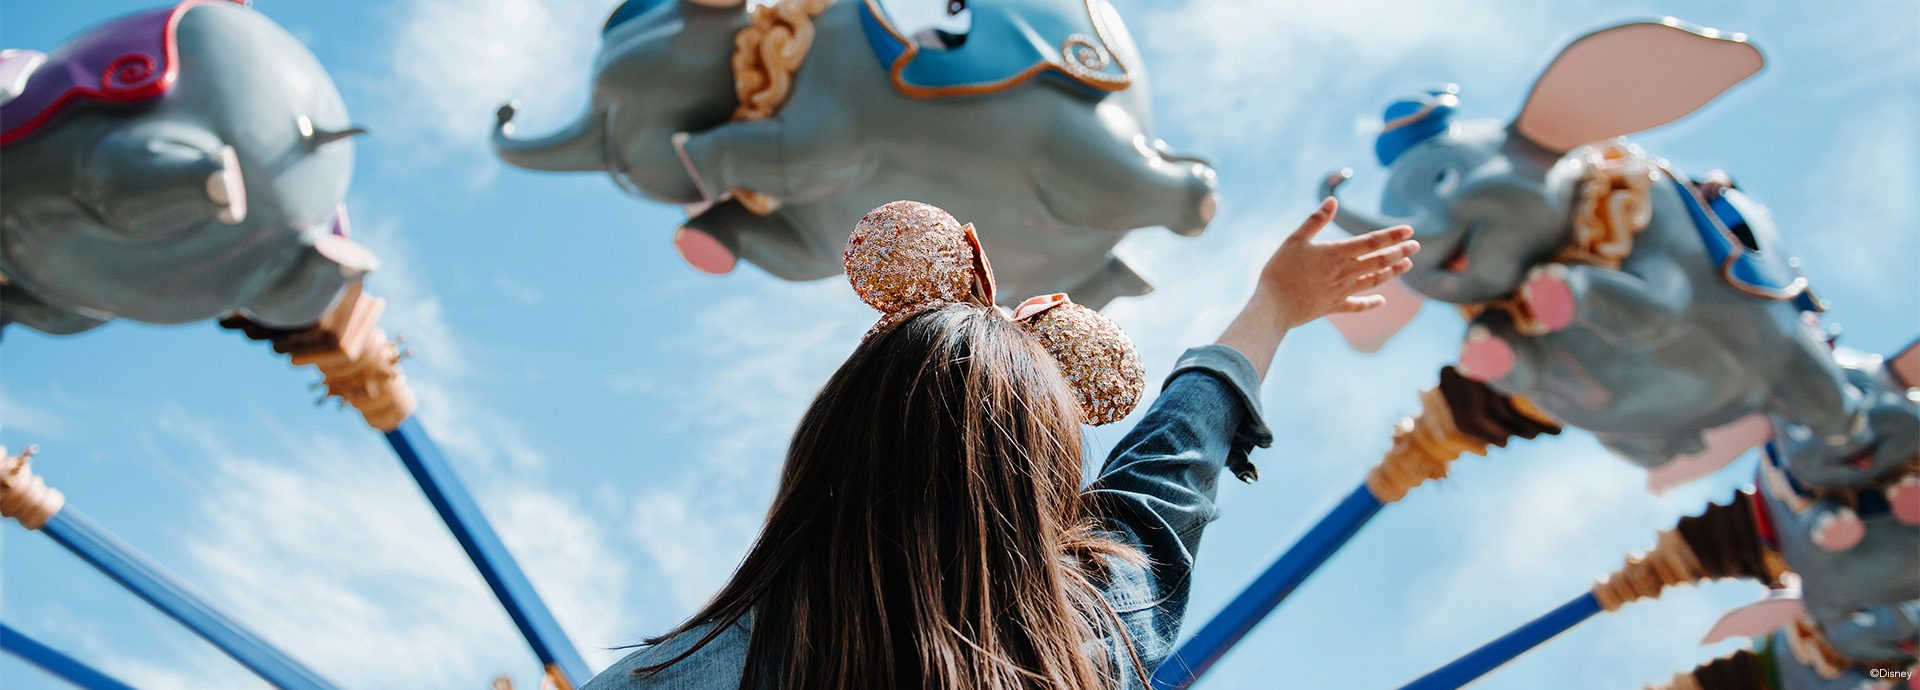 girl standing in front of the flying Dumbo ride with ears on